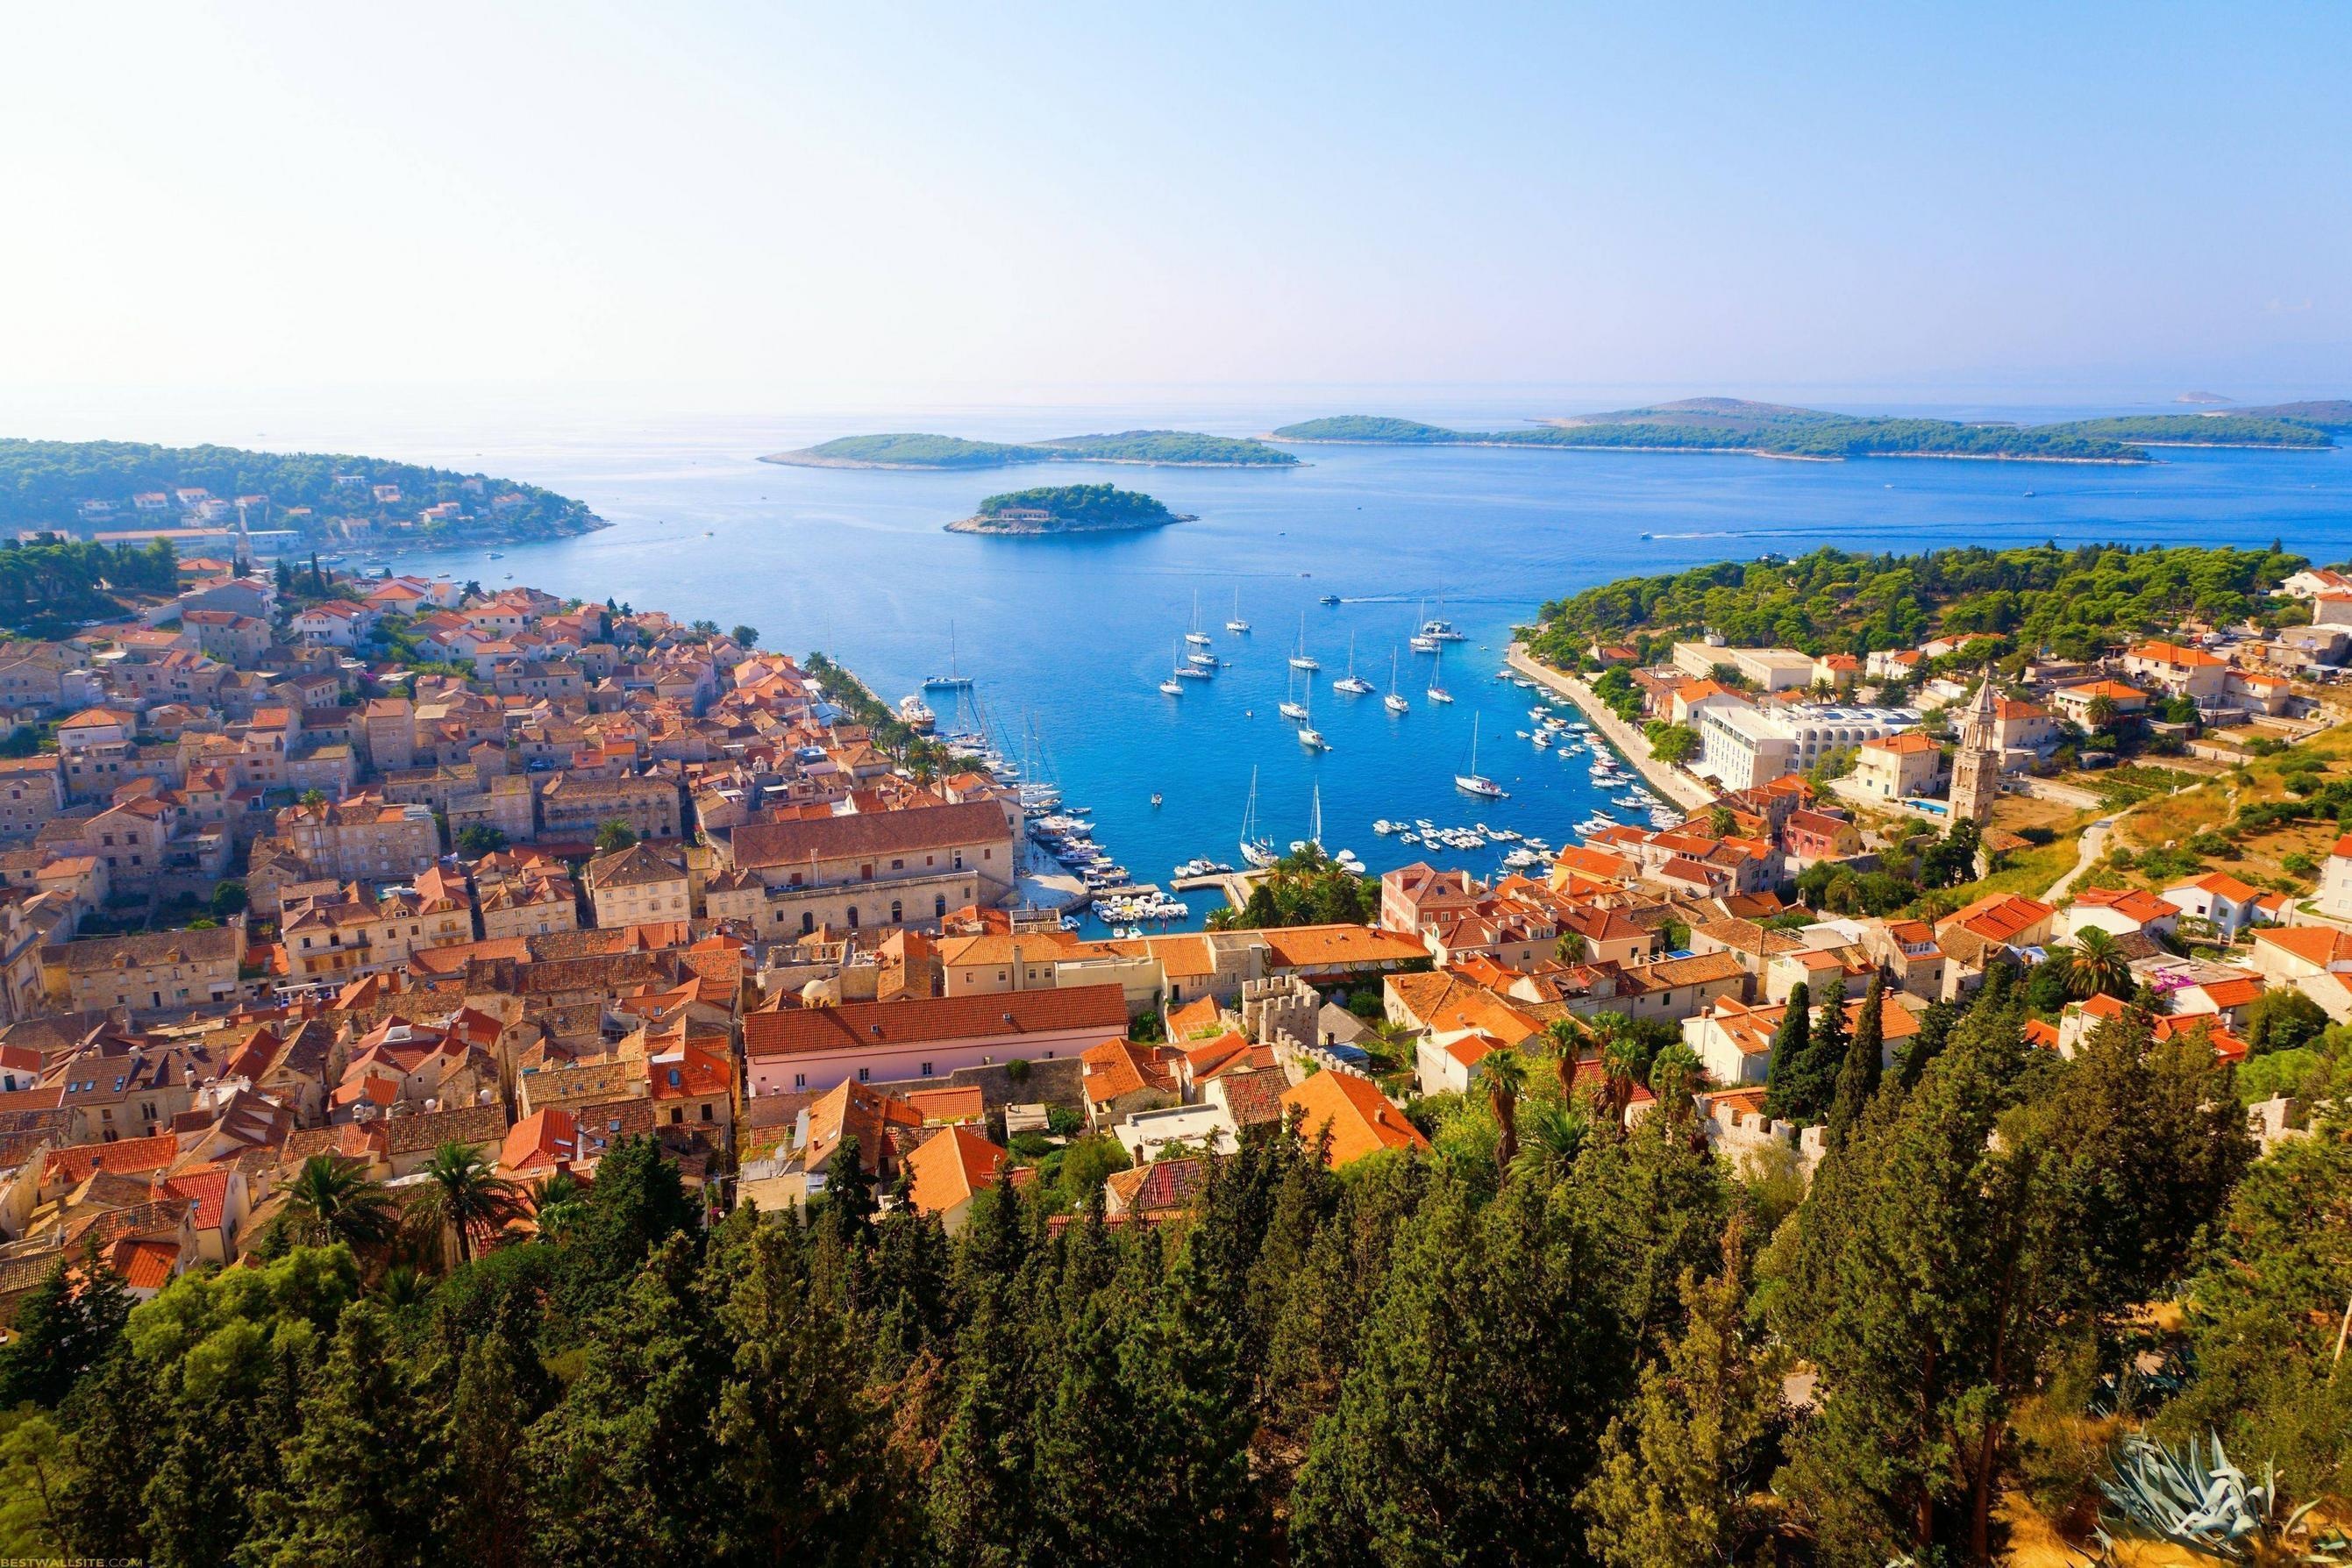 Croatia: Famed for its scenic pebbled beaches, which are beautifully lapped by crystal-clear waters. 2690x1790 HD Wallpaper.